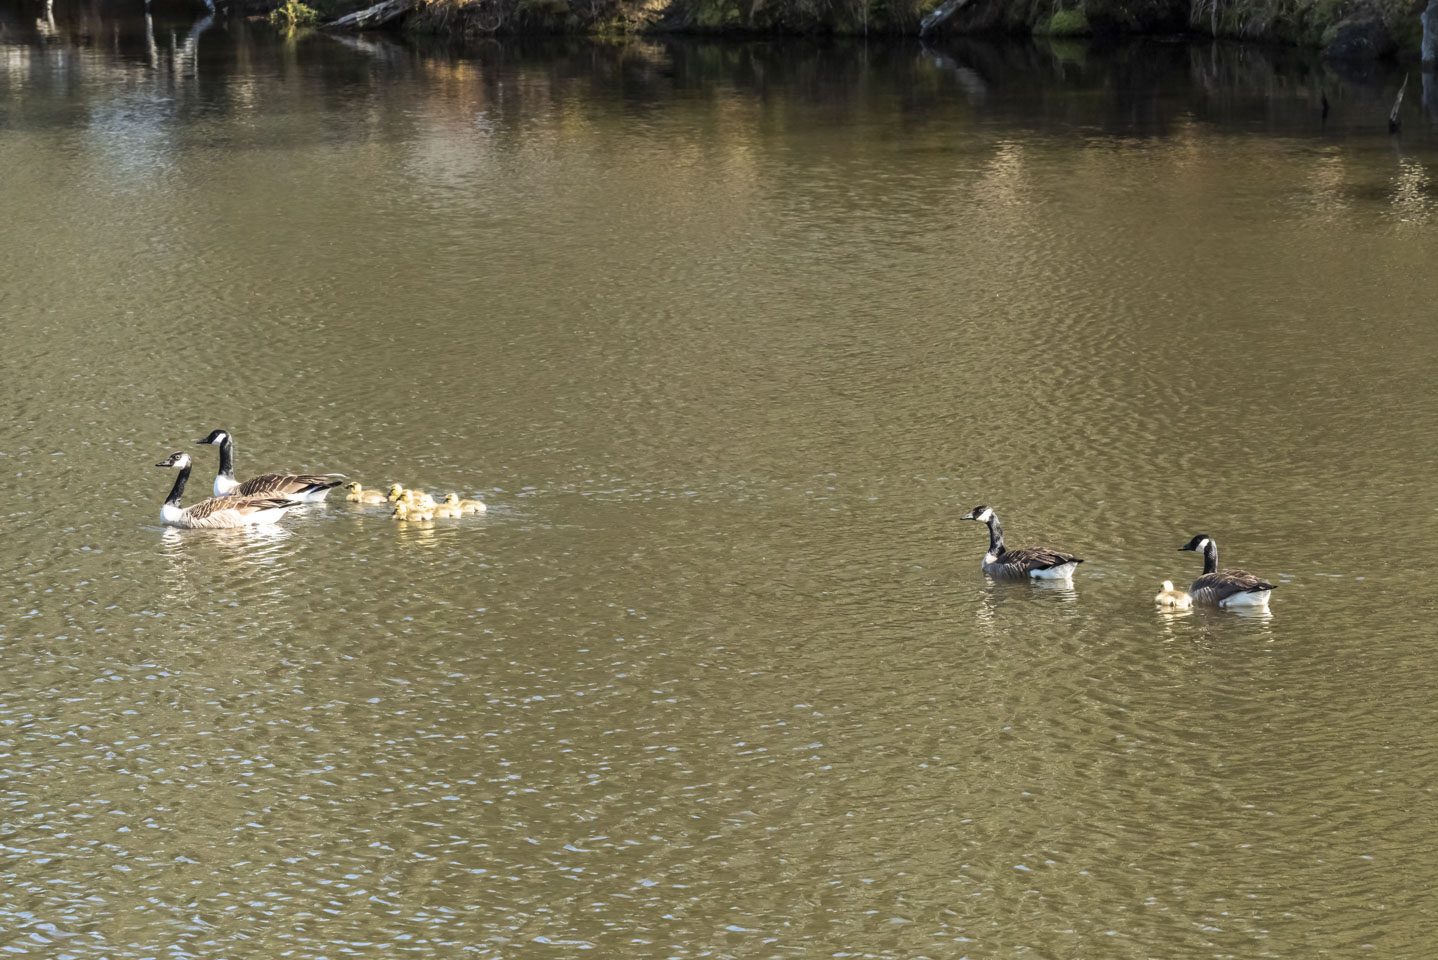 Two Canada Geese families, one larger than the other